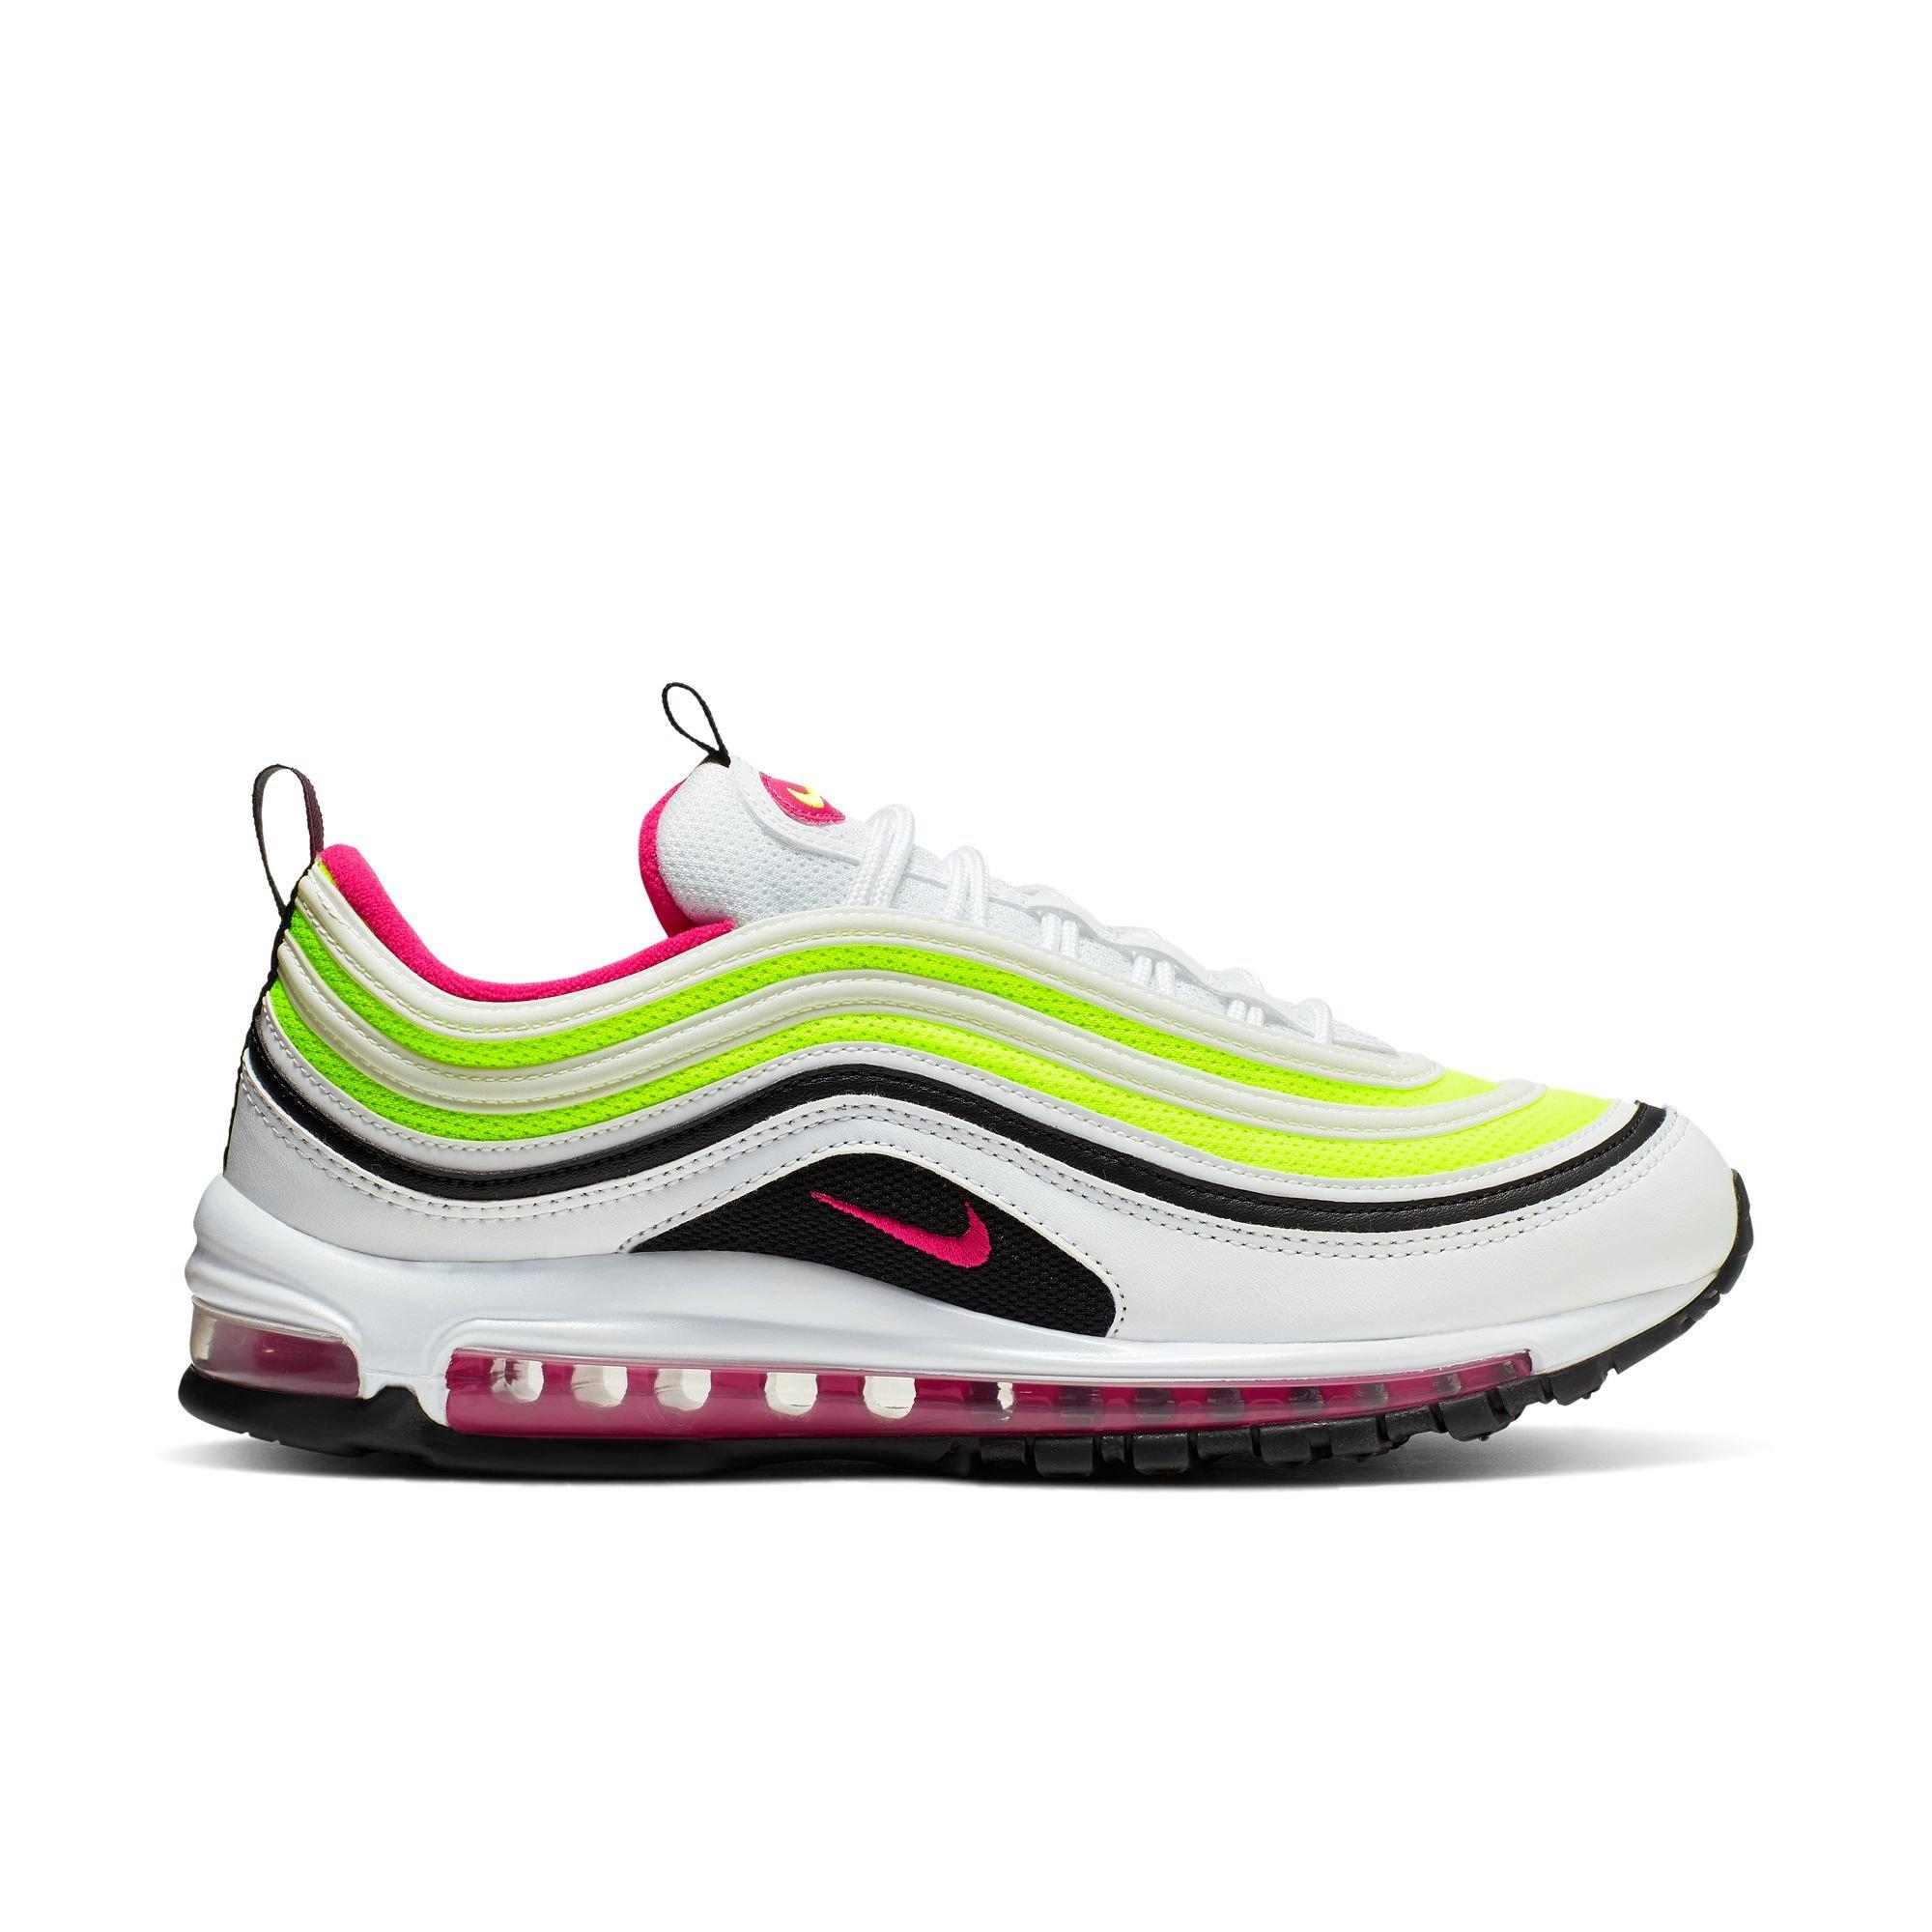 lime green and pink air max 97